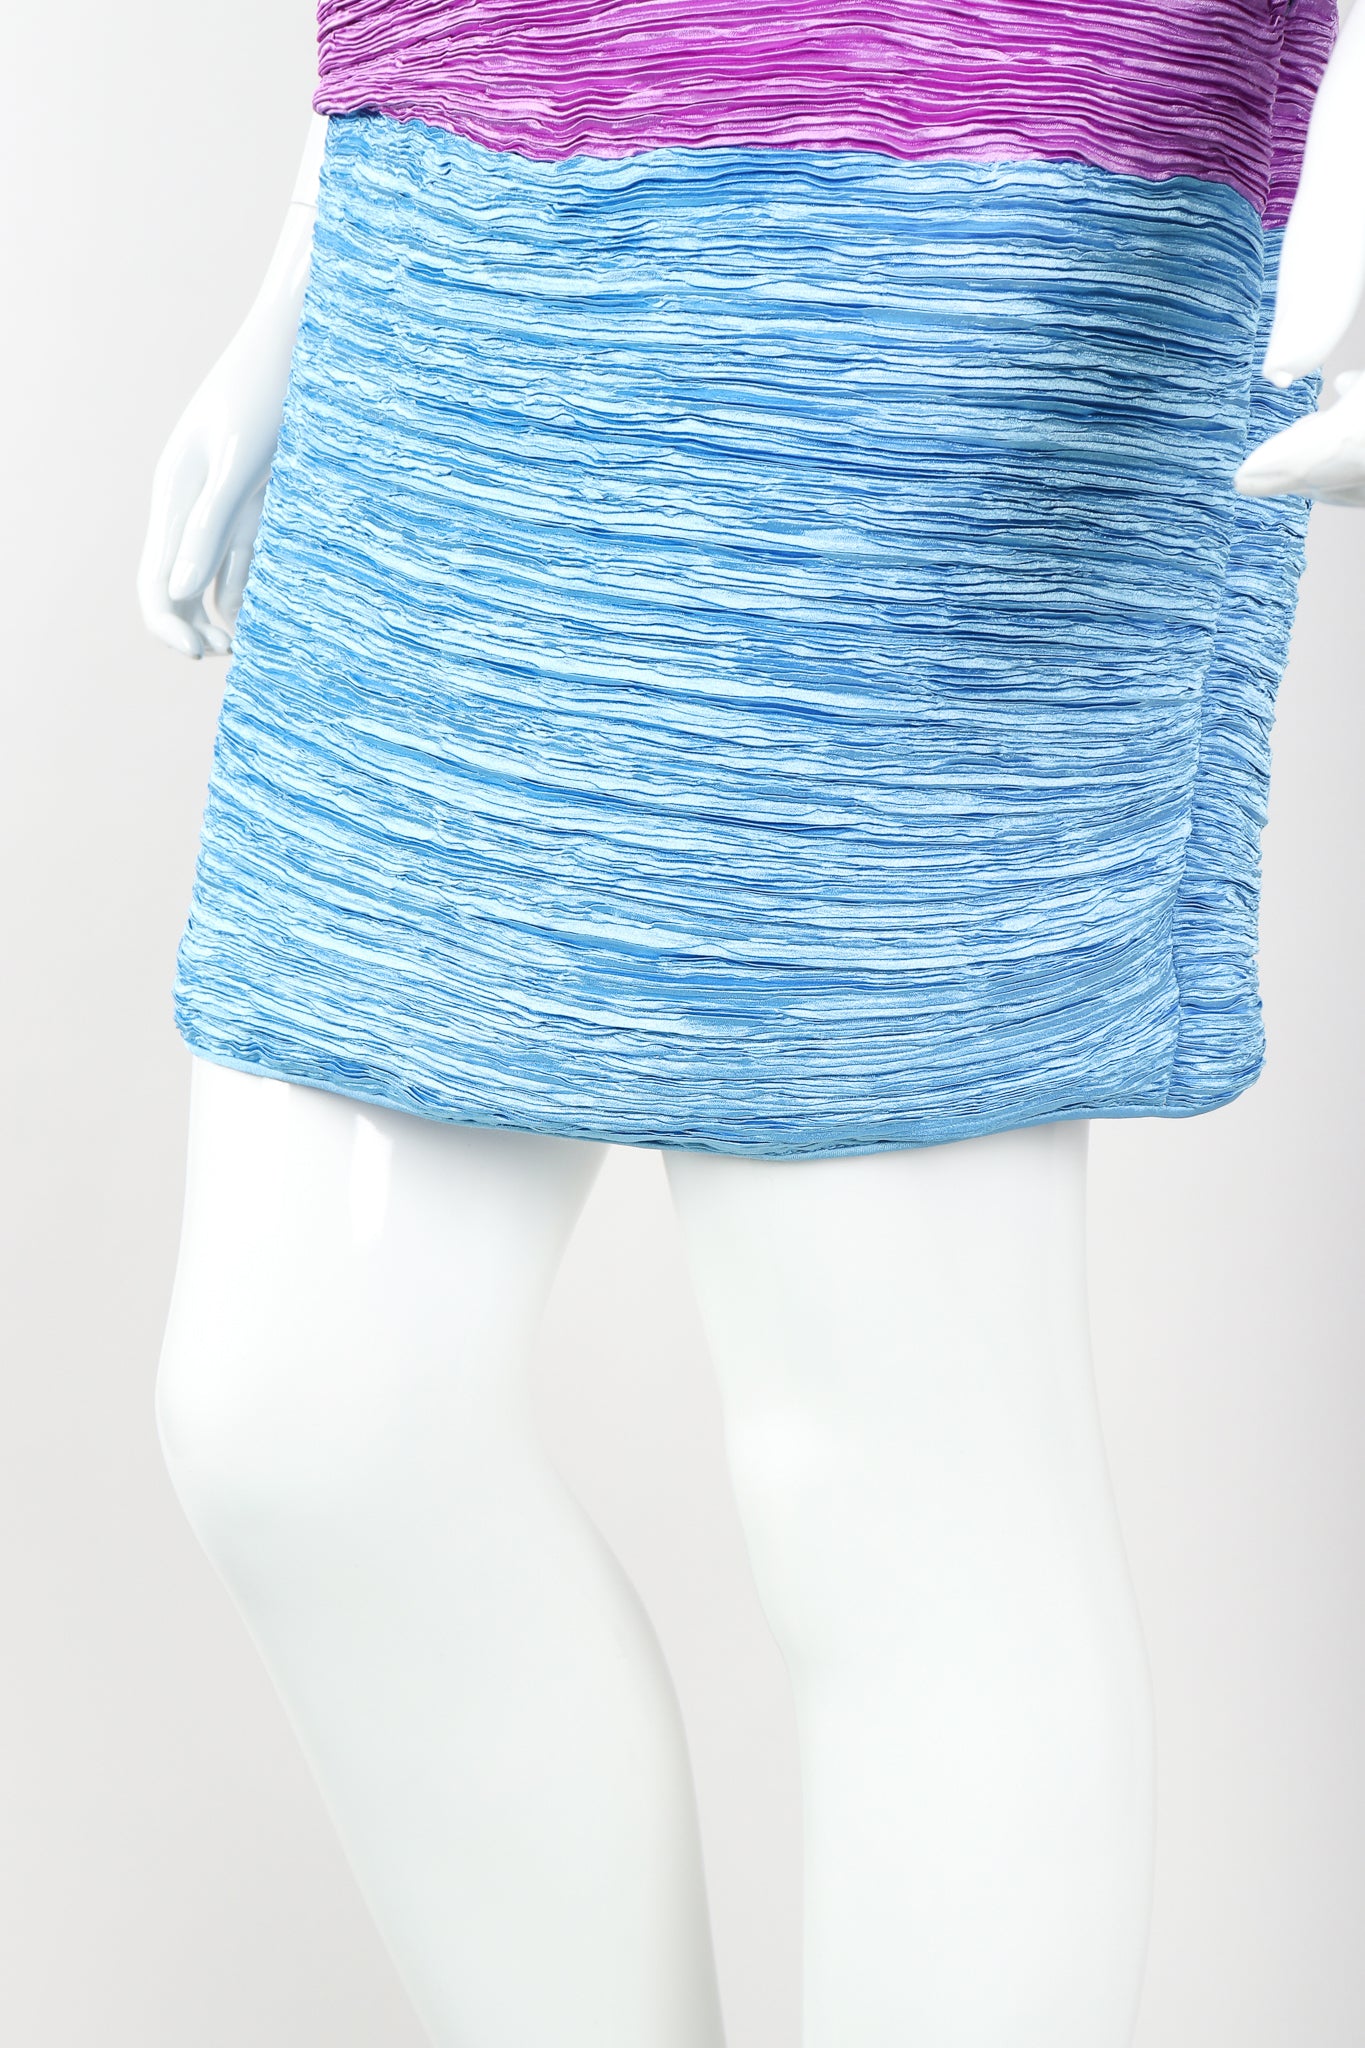 Recess Designer Consignment Vintage Mary McFadden Pleated Colorblock Cocktail Dress Los Angeles Resale Mariano Fortuny